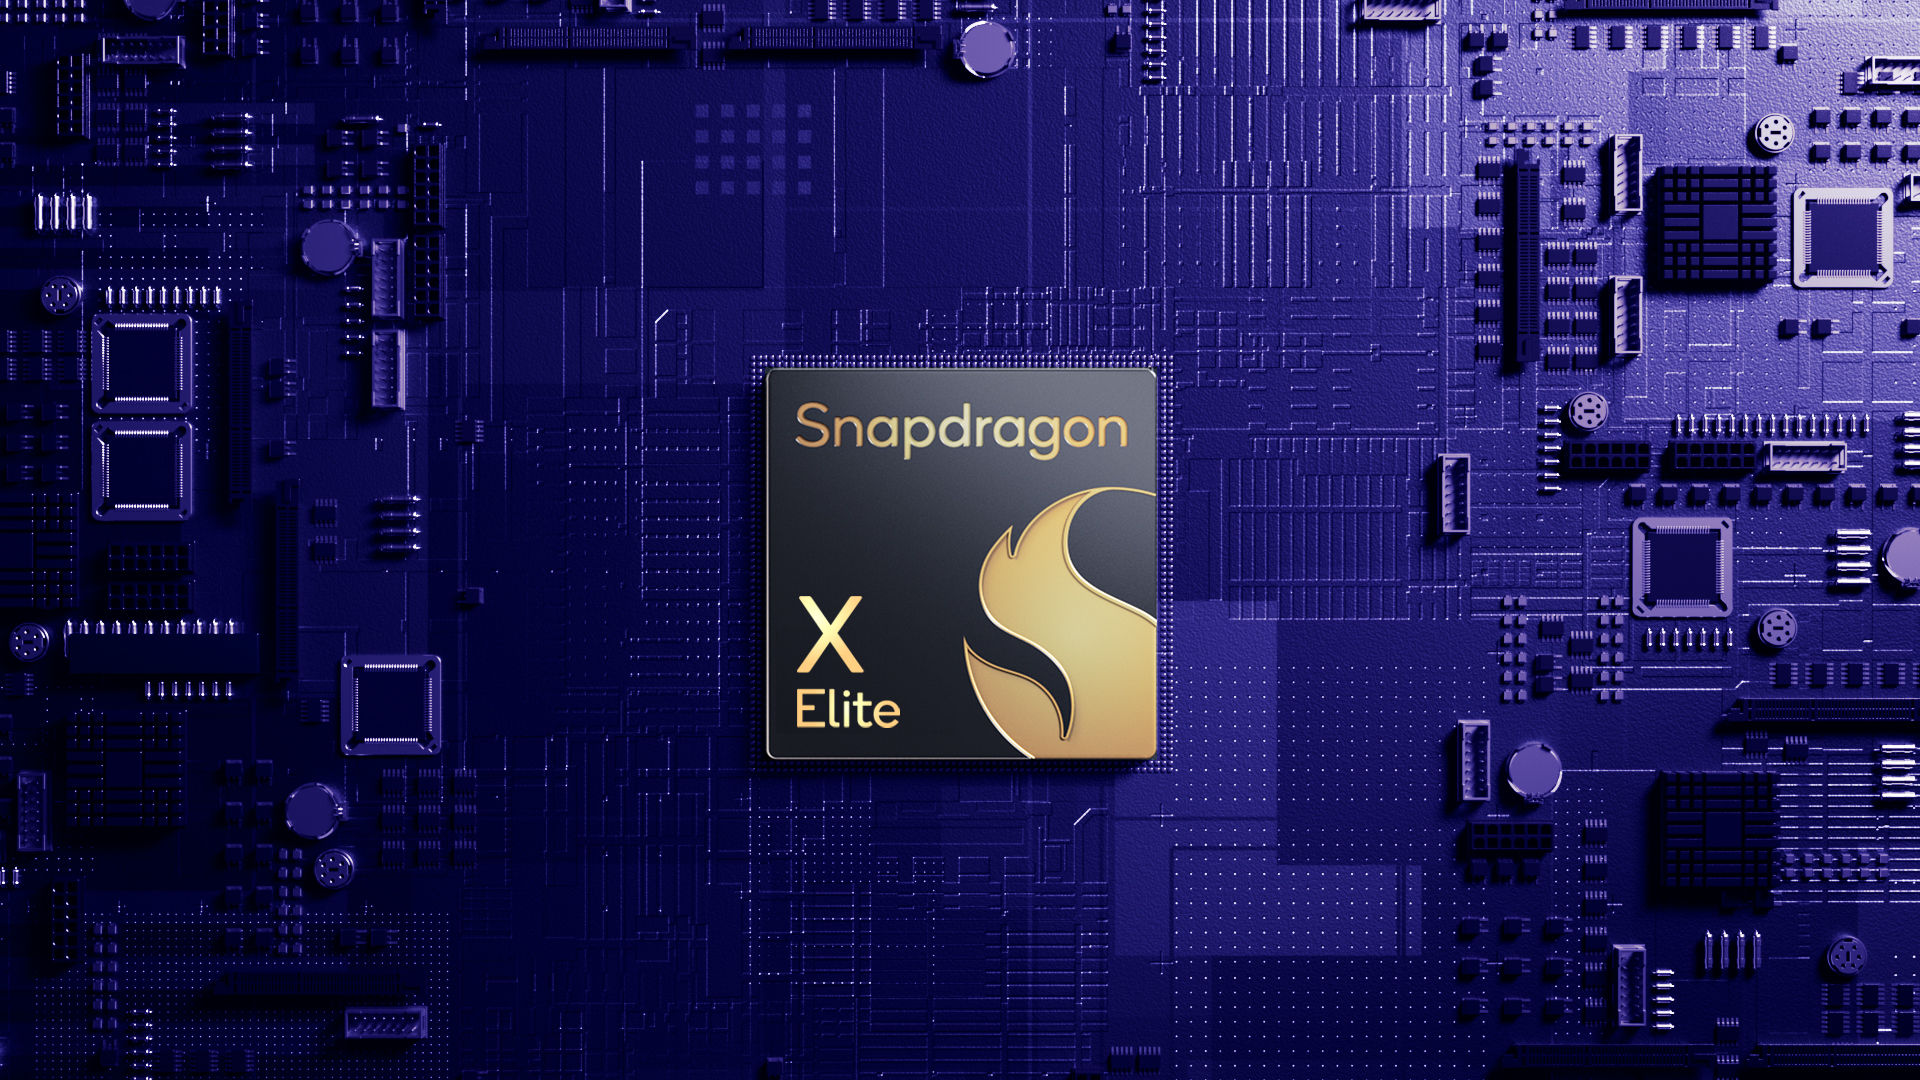 mysmartprice on X: Which upcoming Snapdragon 8 Gen 3-powered smartphone  are you most excited for?  / X